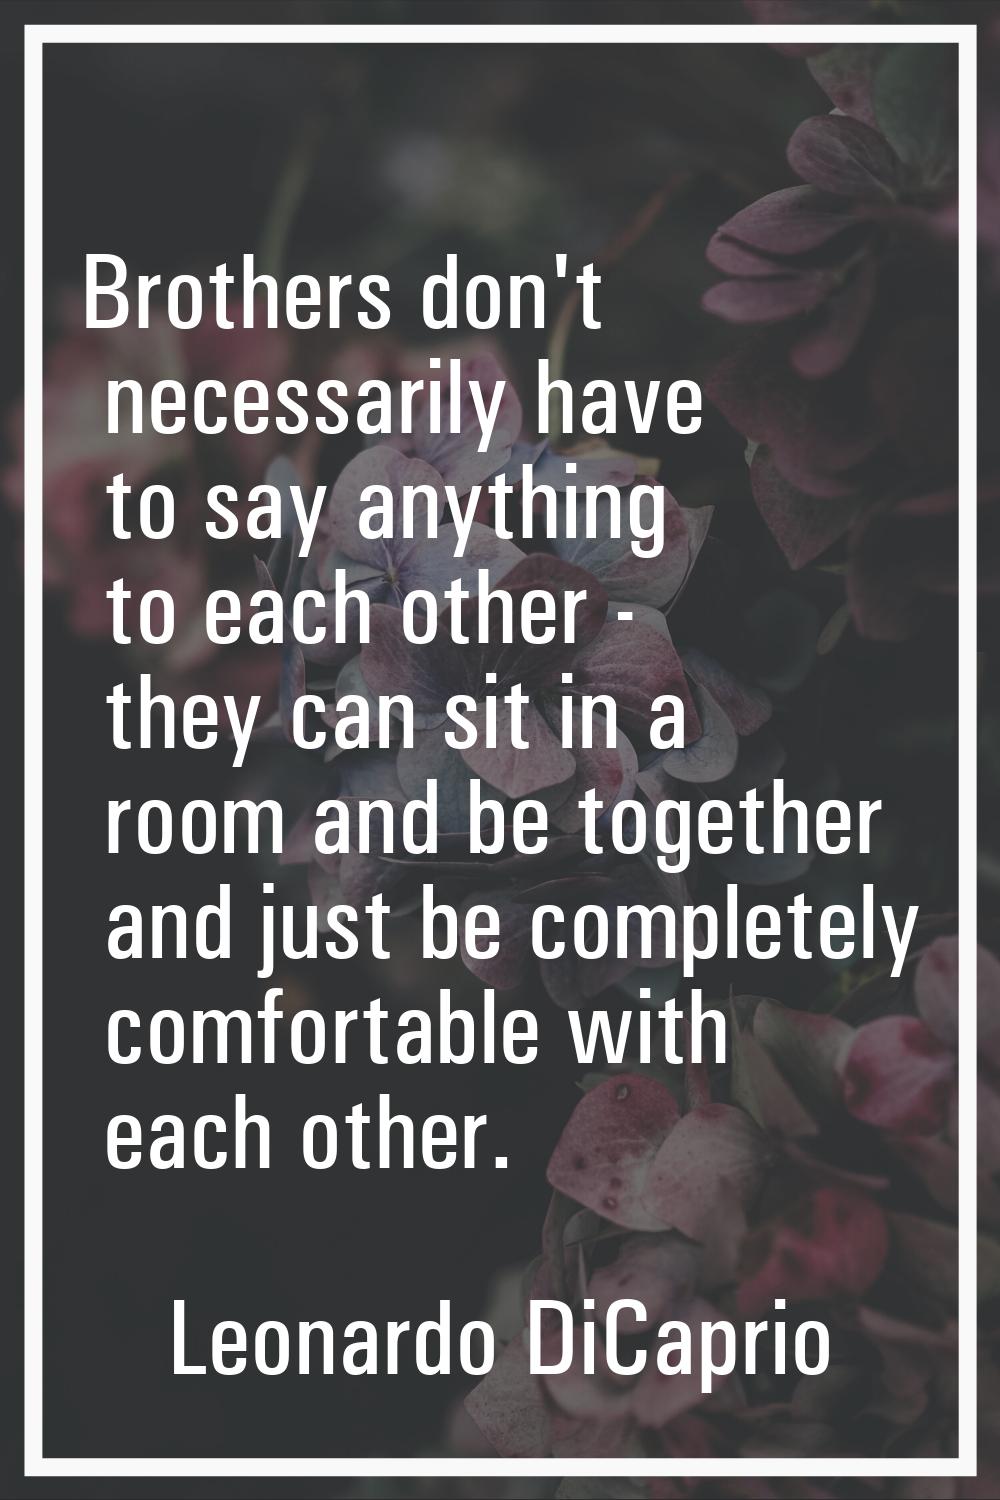 Brothers don't necessarily have to say anything to each other - they can sit in a room and be toget